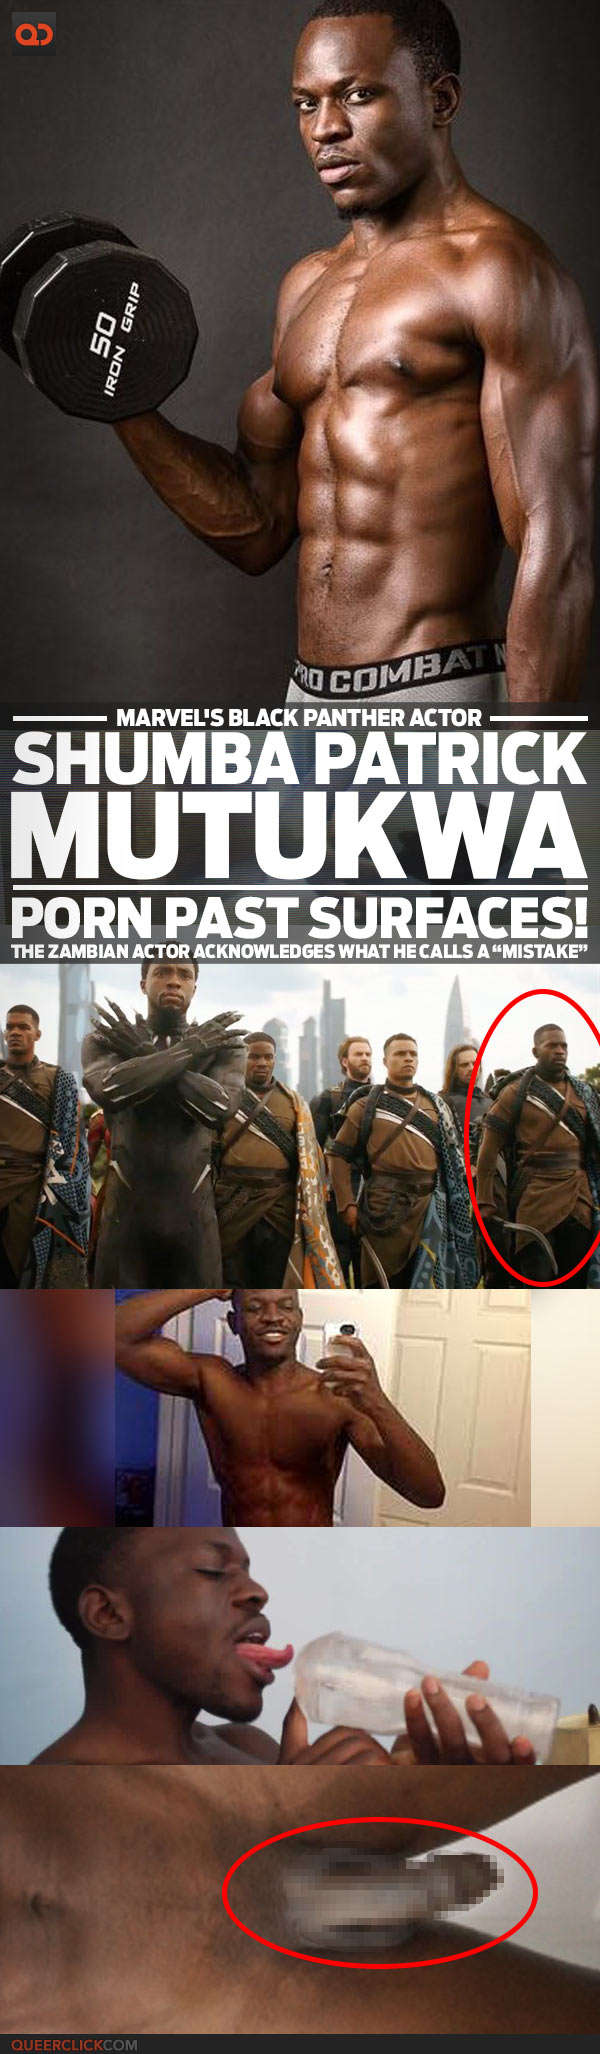 Black Zambian Porn - Shumba Patrick Mutukwa, Marvel's Black Panther Actor, Porn Past Surfaces! -  The Zambian Actor Acknowledges What He Calls A â€œMistakeâ€ - QueerClick